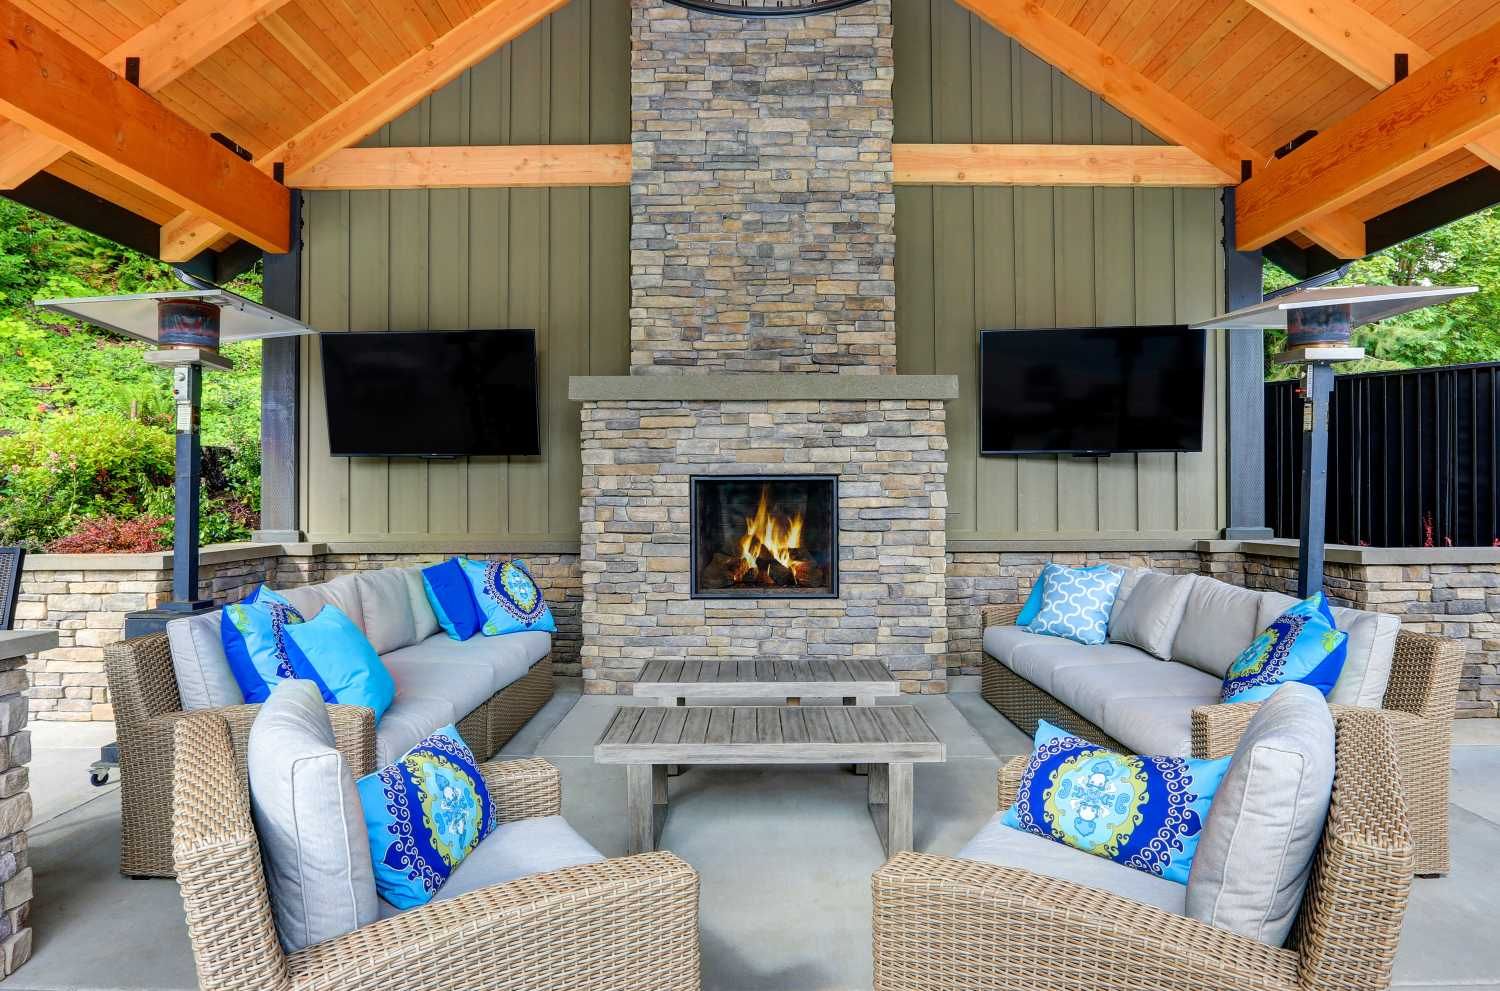 Outdoor chimney and entertainment setup